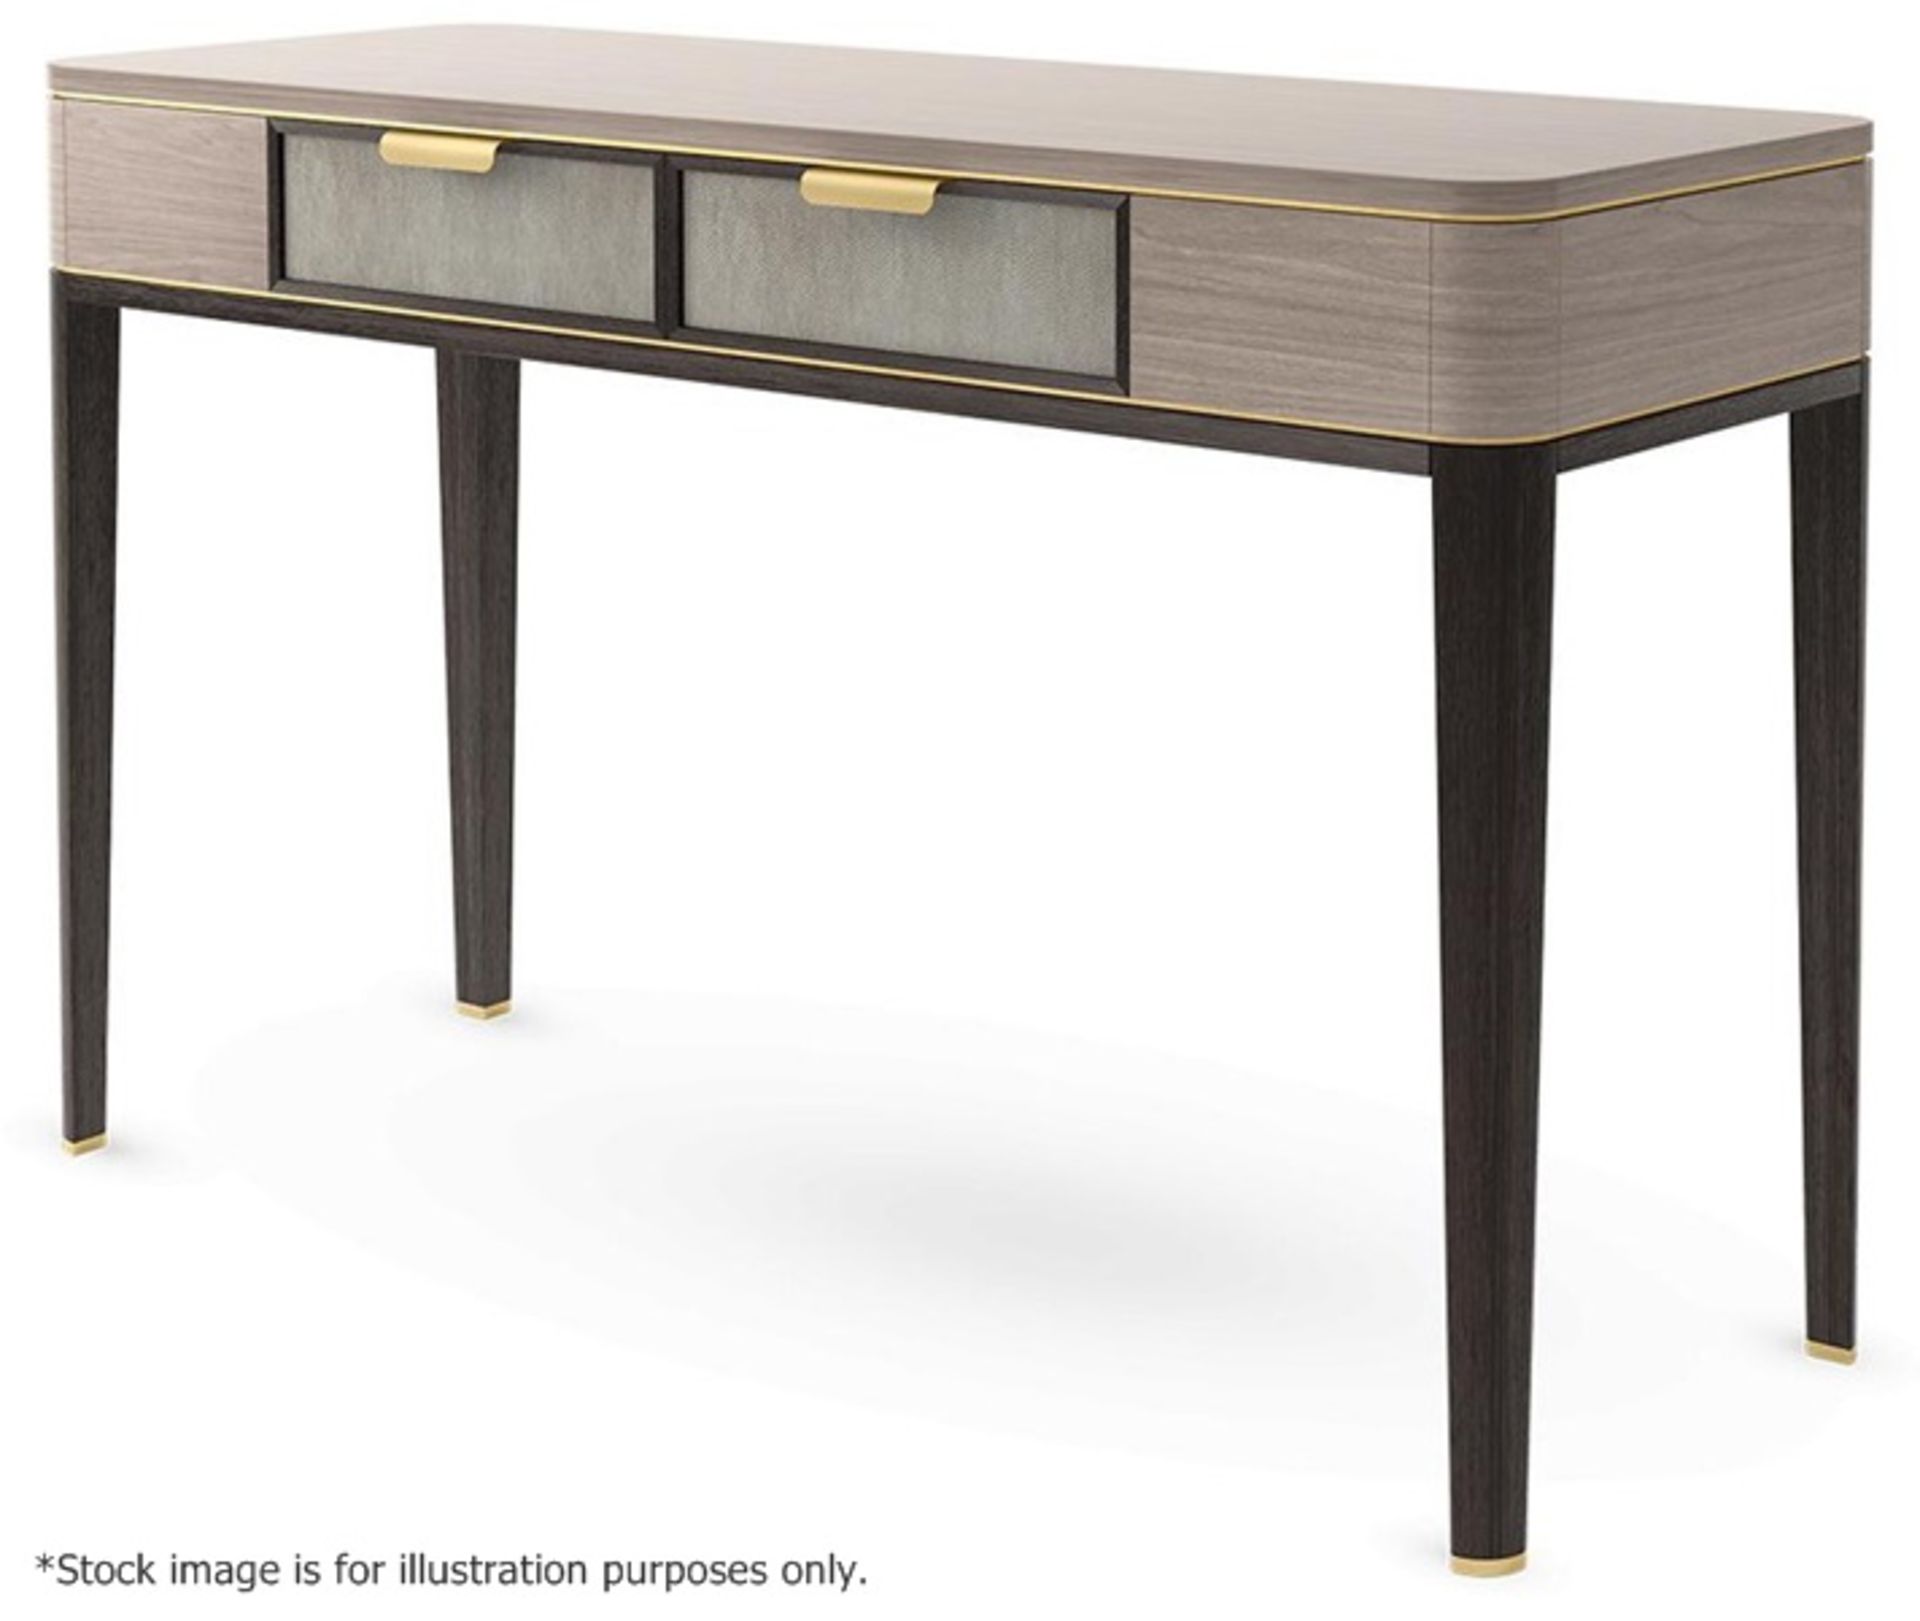 1 x FRATO 'Mandalay' Luxury Designer 2-Drawer Dresser Dressing Table In A Gloss Finish - RRP £4,300 - Image 9 of 17